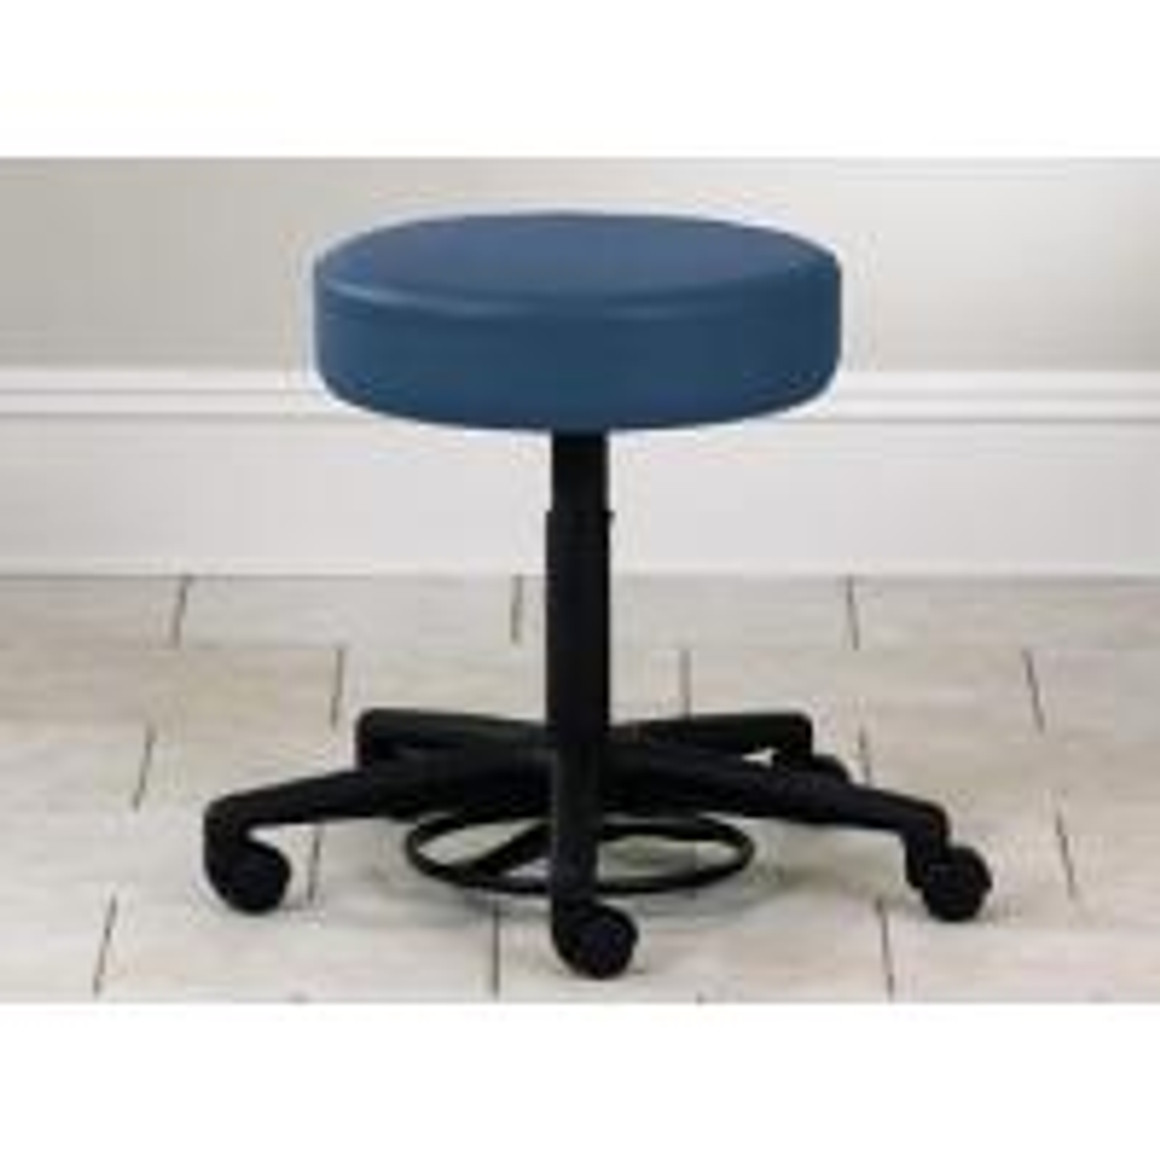 Clinton Foot Activated Pneumatic Stool, Neutral